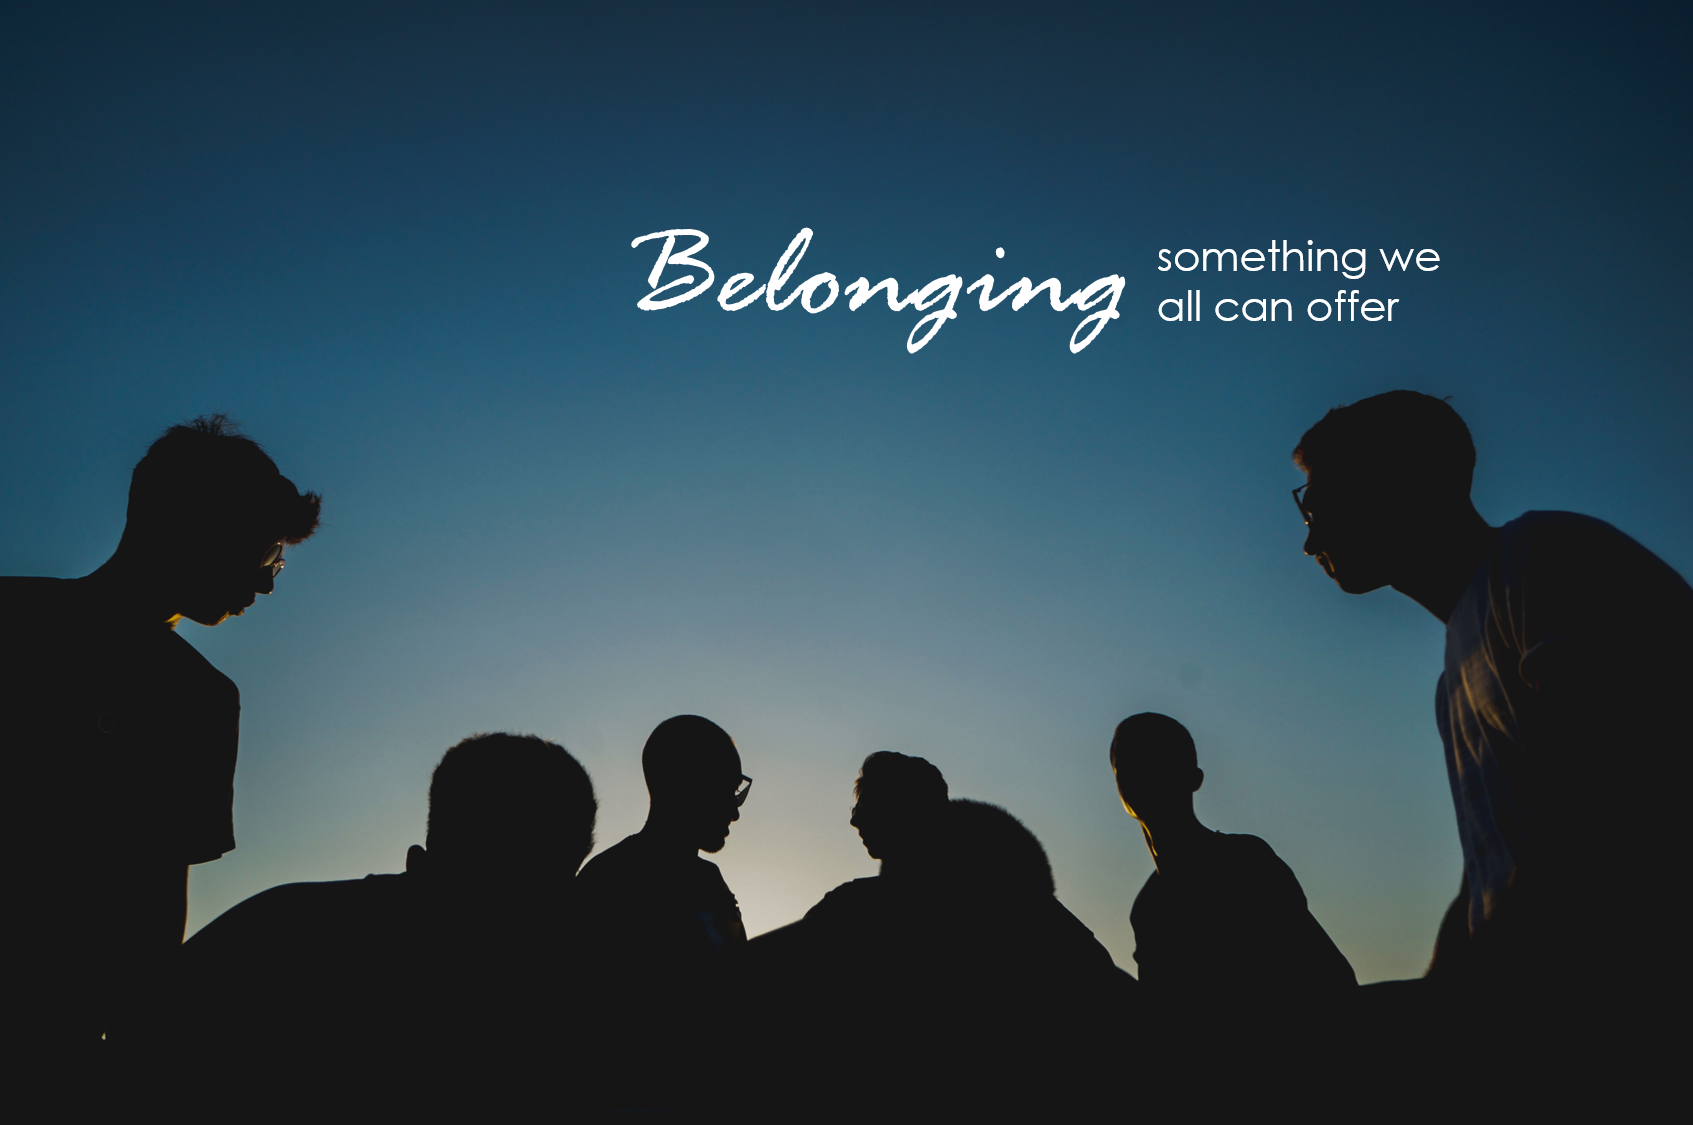 Silhouettes and text "Belonging: something we all can offer"